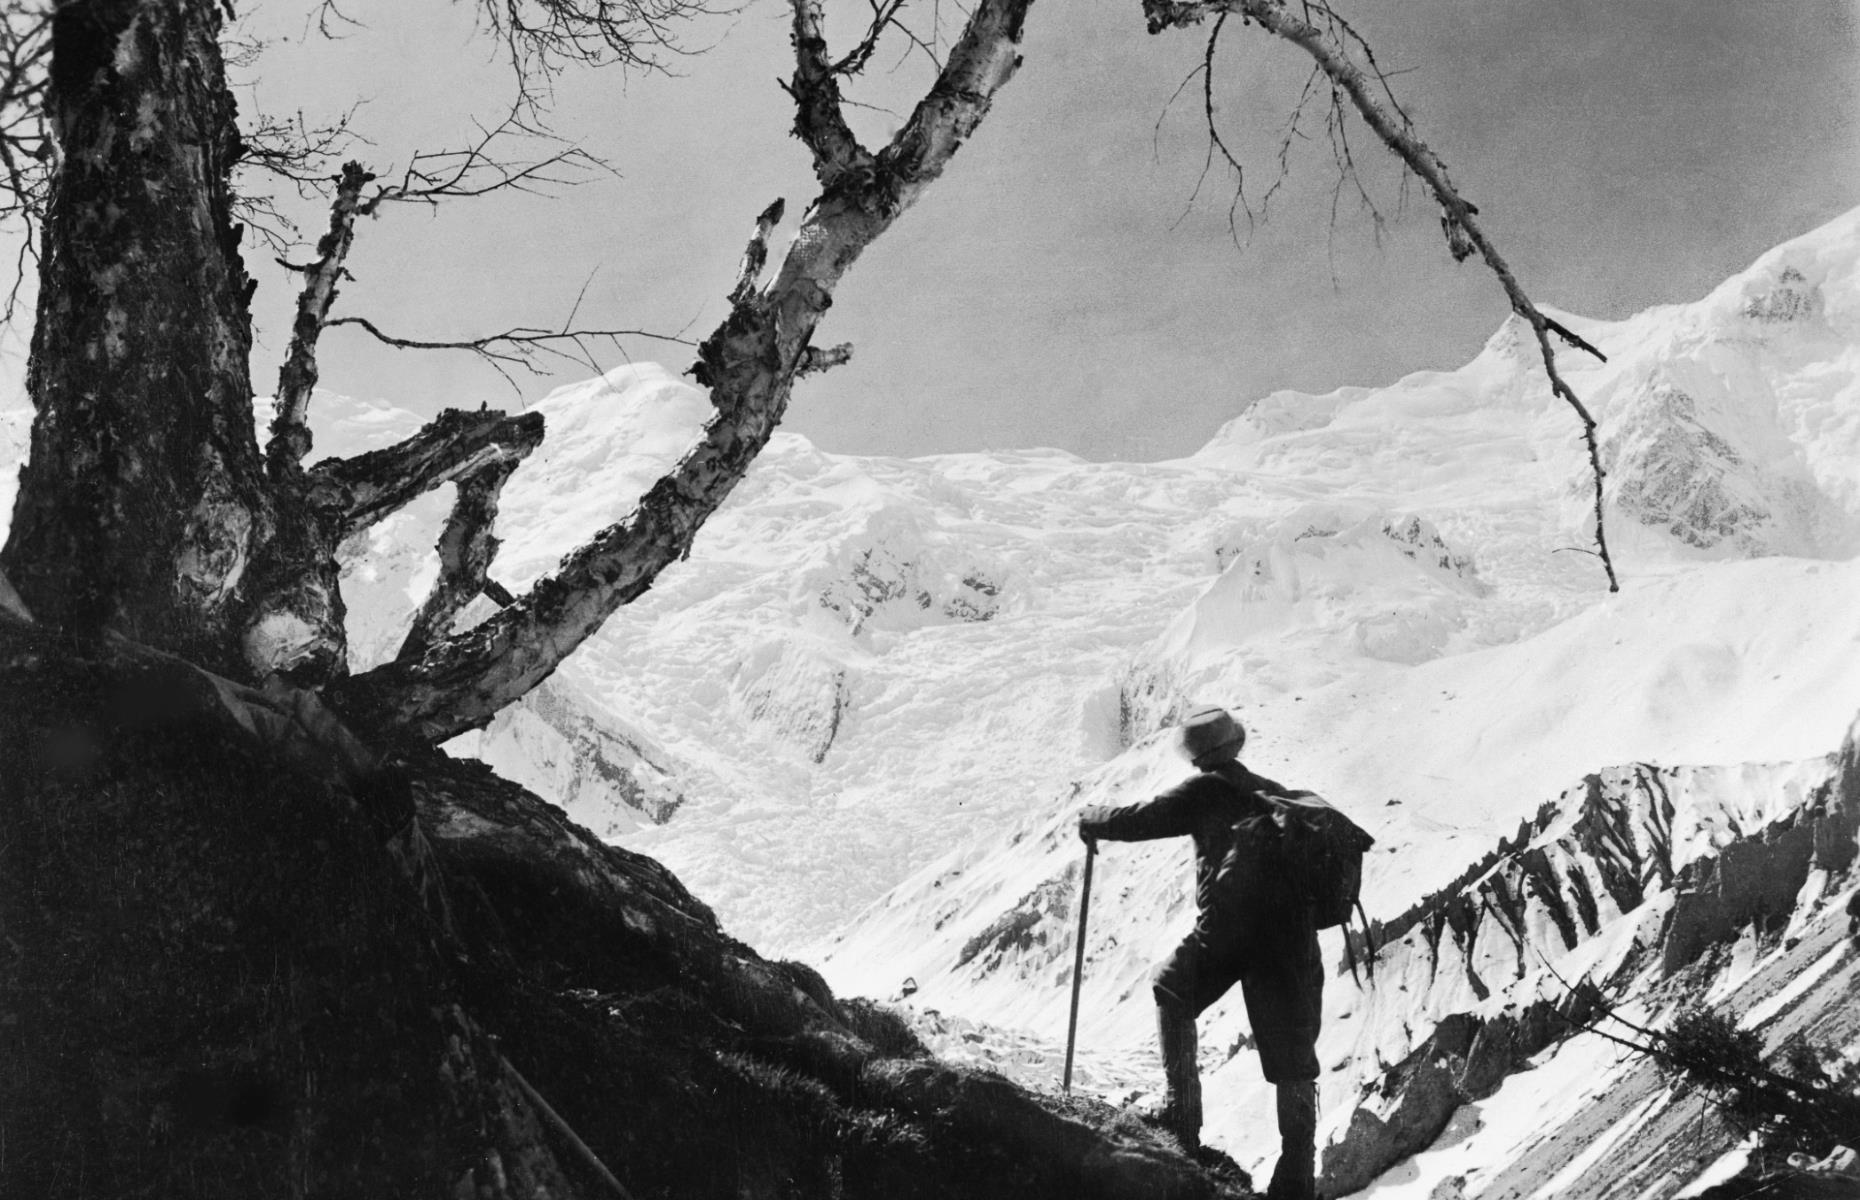 <p>The tallest mountain on the planet has fascinated people for millennia, but its summit wasn’t successfully reached until 1953, when New Zealander explorer Edmund Hillary and Nepali Sherpa Tenzing Norgay officially scaled the peak. Shown here in 1955, a climber gazes out at Mount Everest from one of the surrounding paths. However, overcrowding of the path towards the summit in recent years, fuelled in part by cut-price expeditions from Nepali trekking companies, has led to growing concerns about safety. The 2019 season was the deadliest on record, with 11 fatalities.</p>